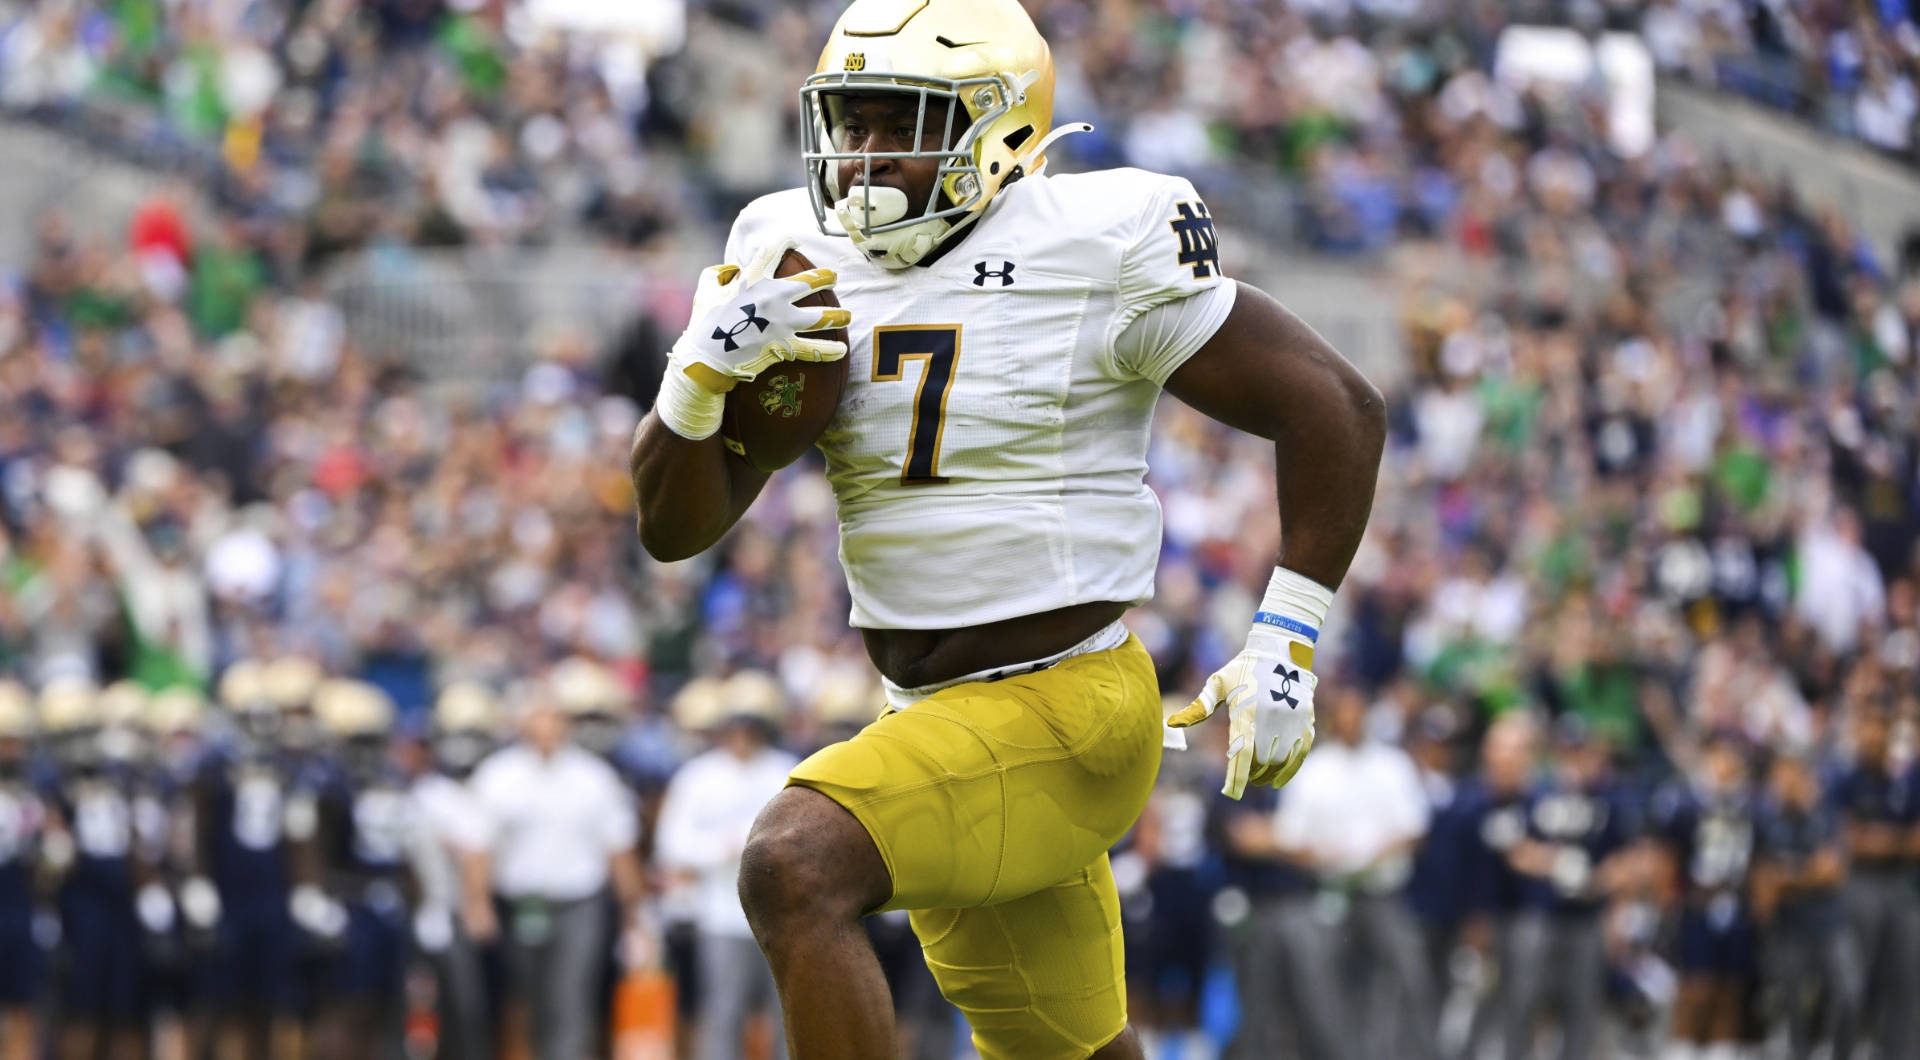 Can Audric Estime push Fighting Irish over favorites USC? Notre Dame vs USC picks and odds